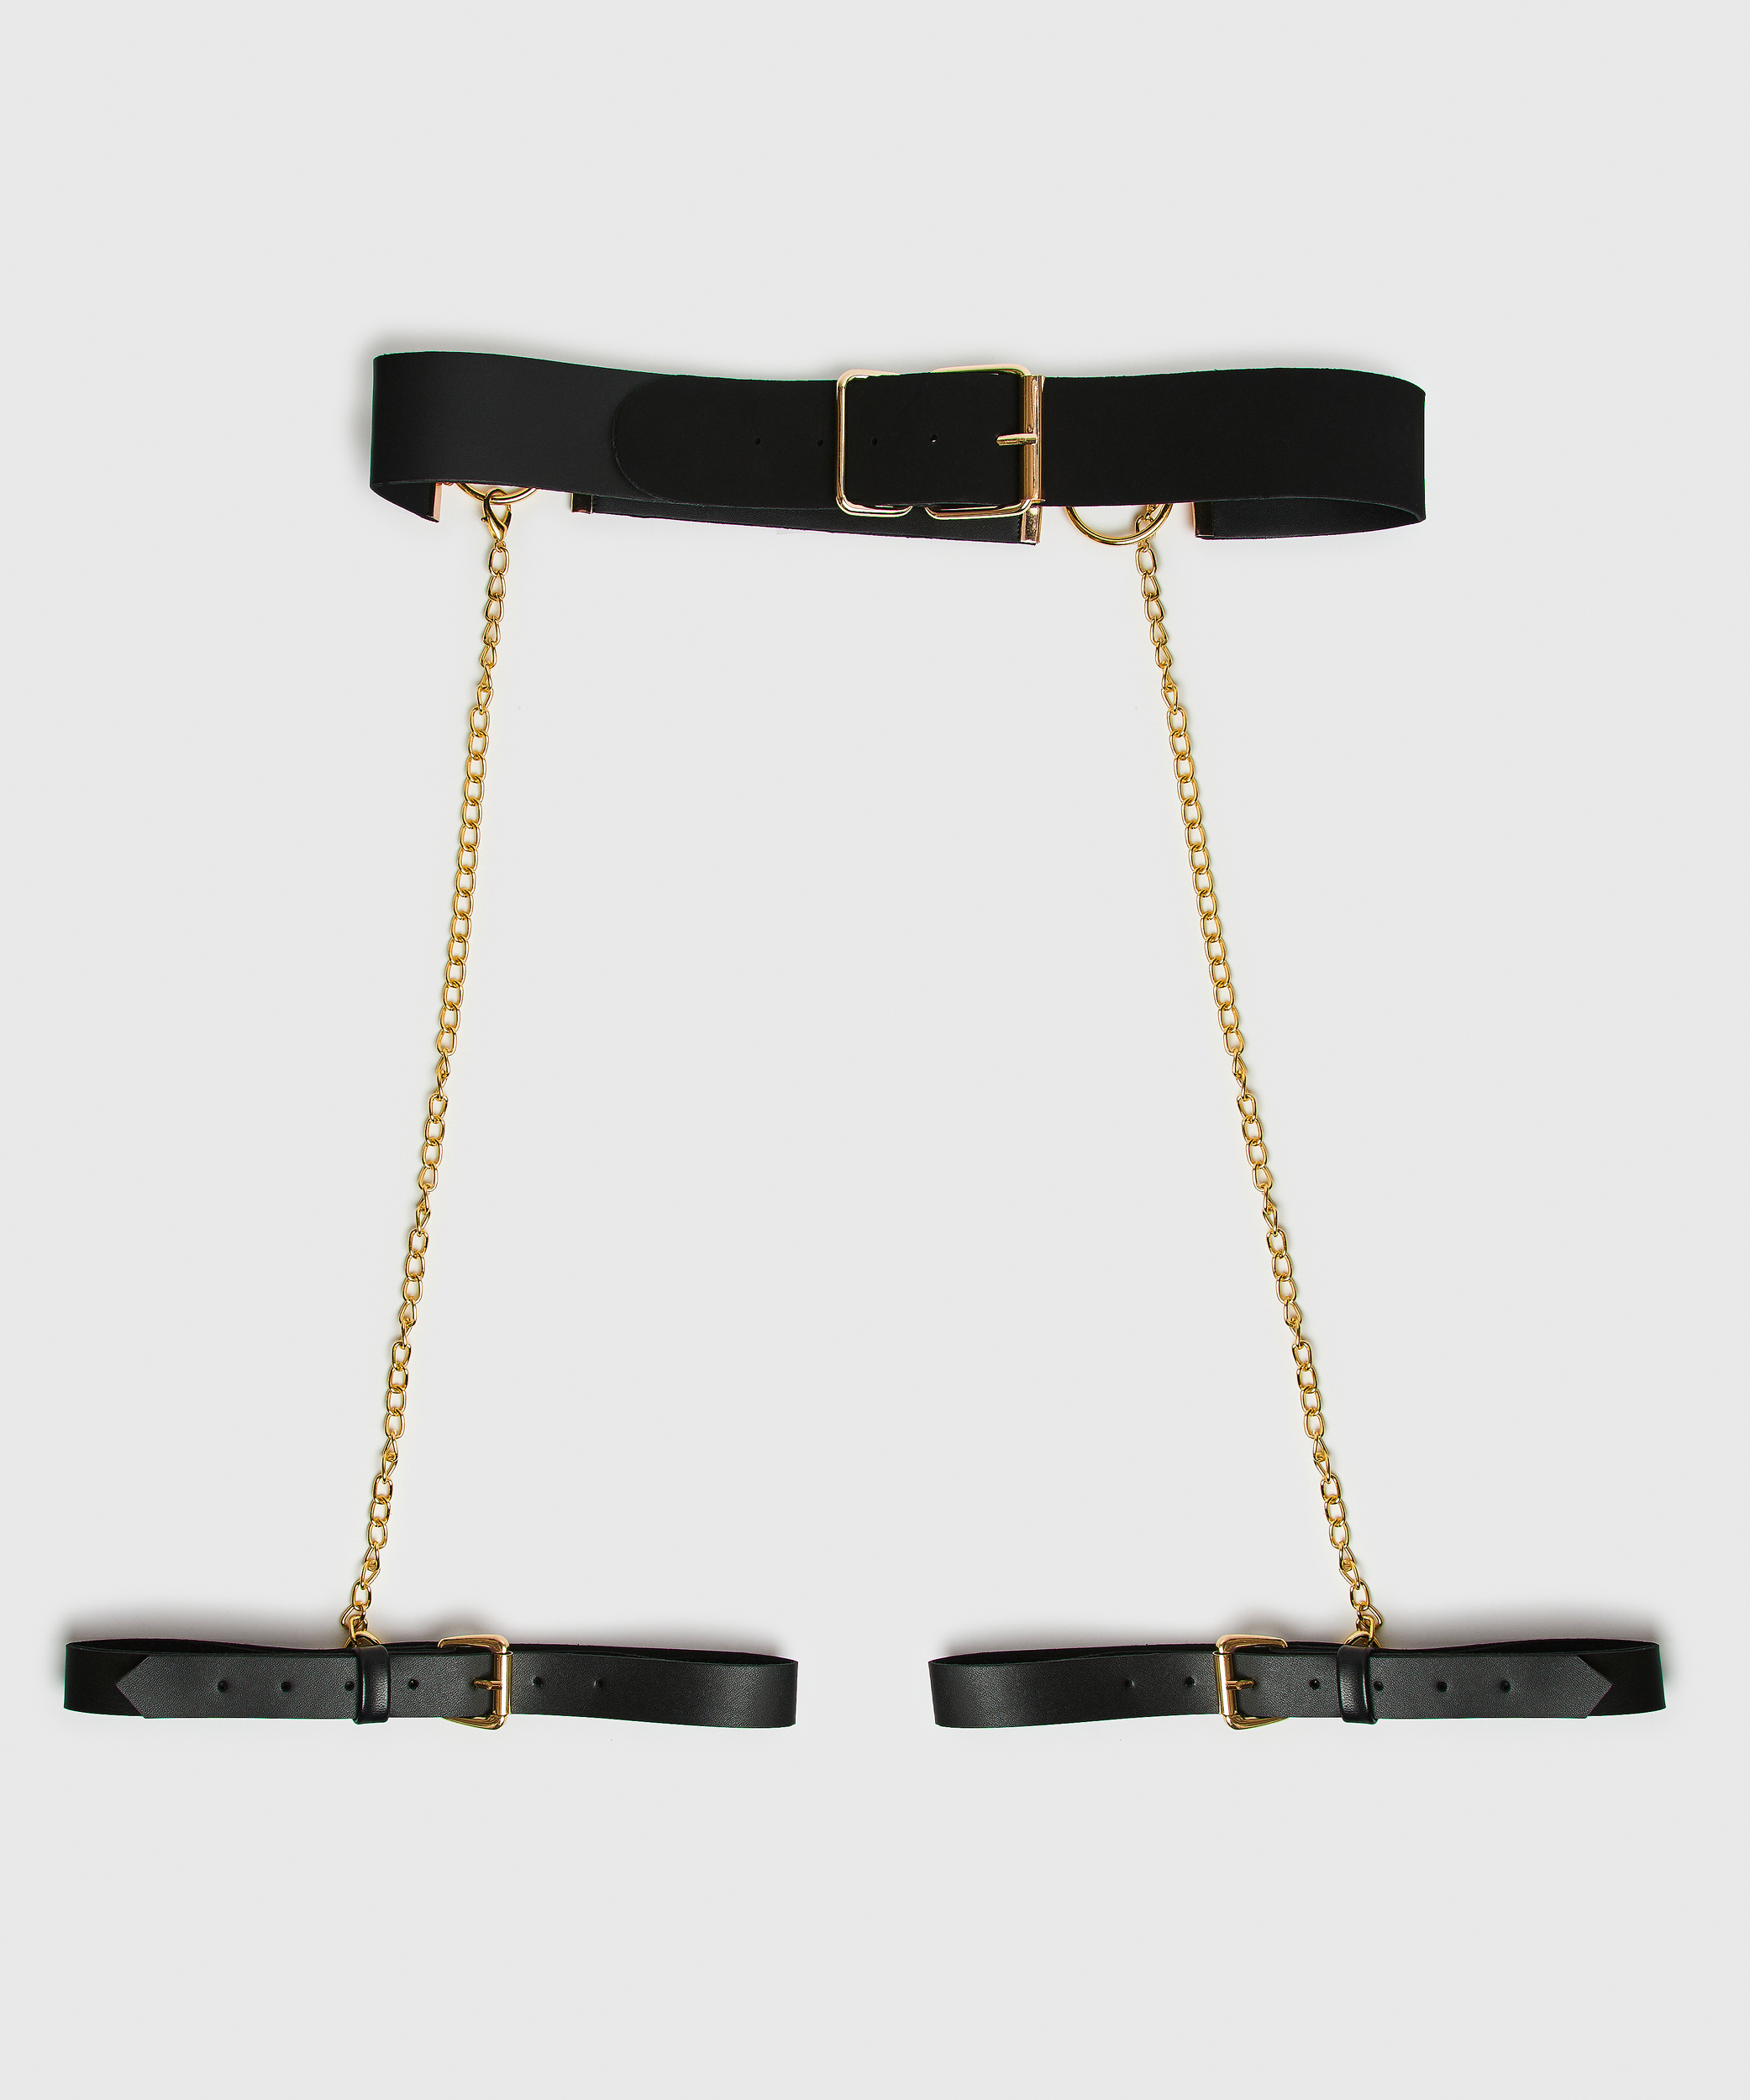 Private Hold Up Suspenders, Black, main